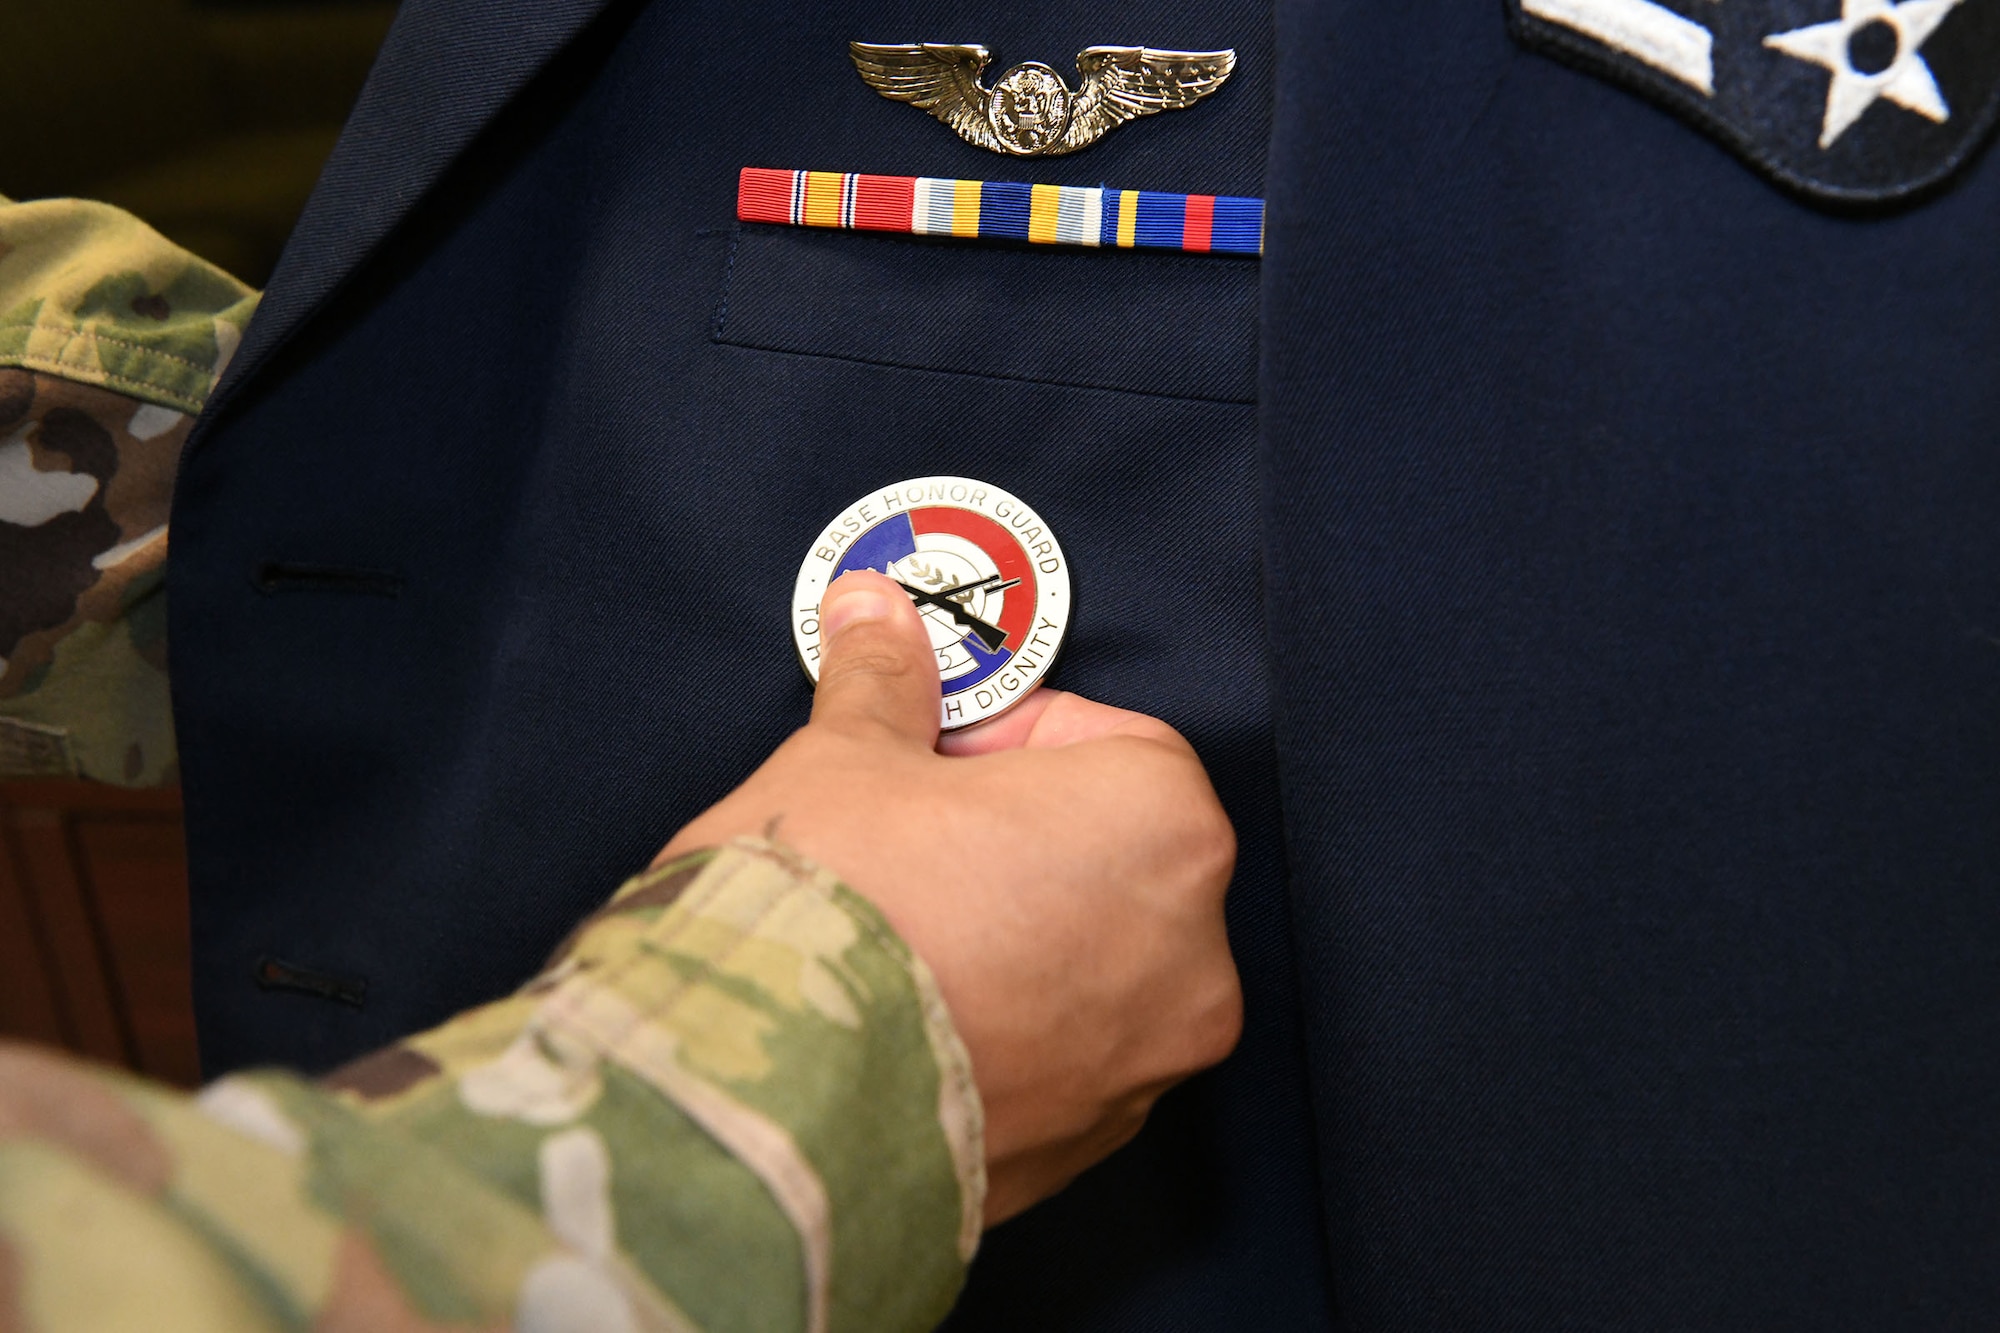 Photo is a closeup of a hand pinning the honor guard medallion to a uniform.